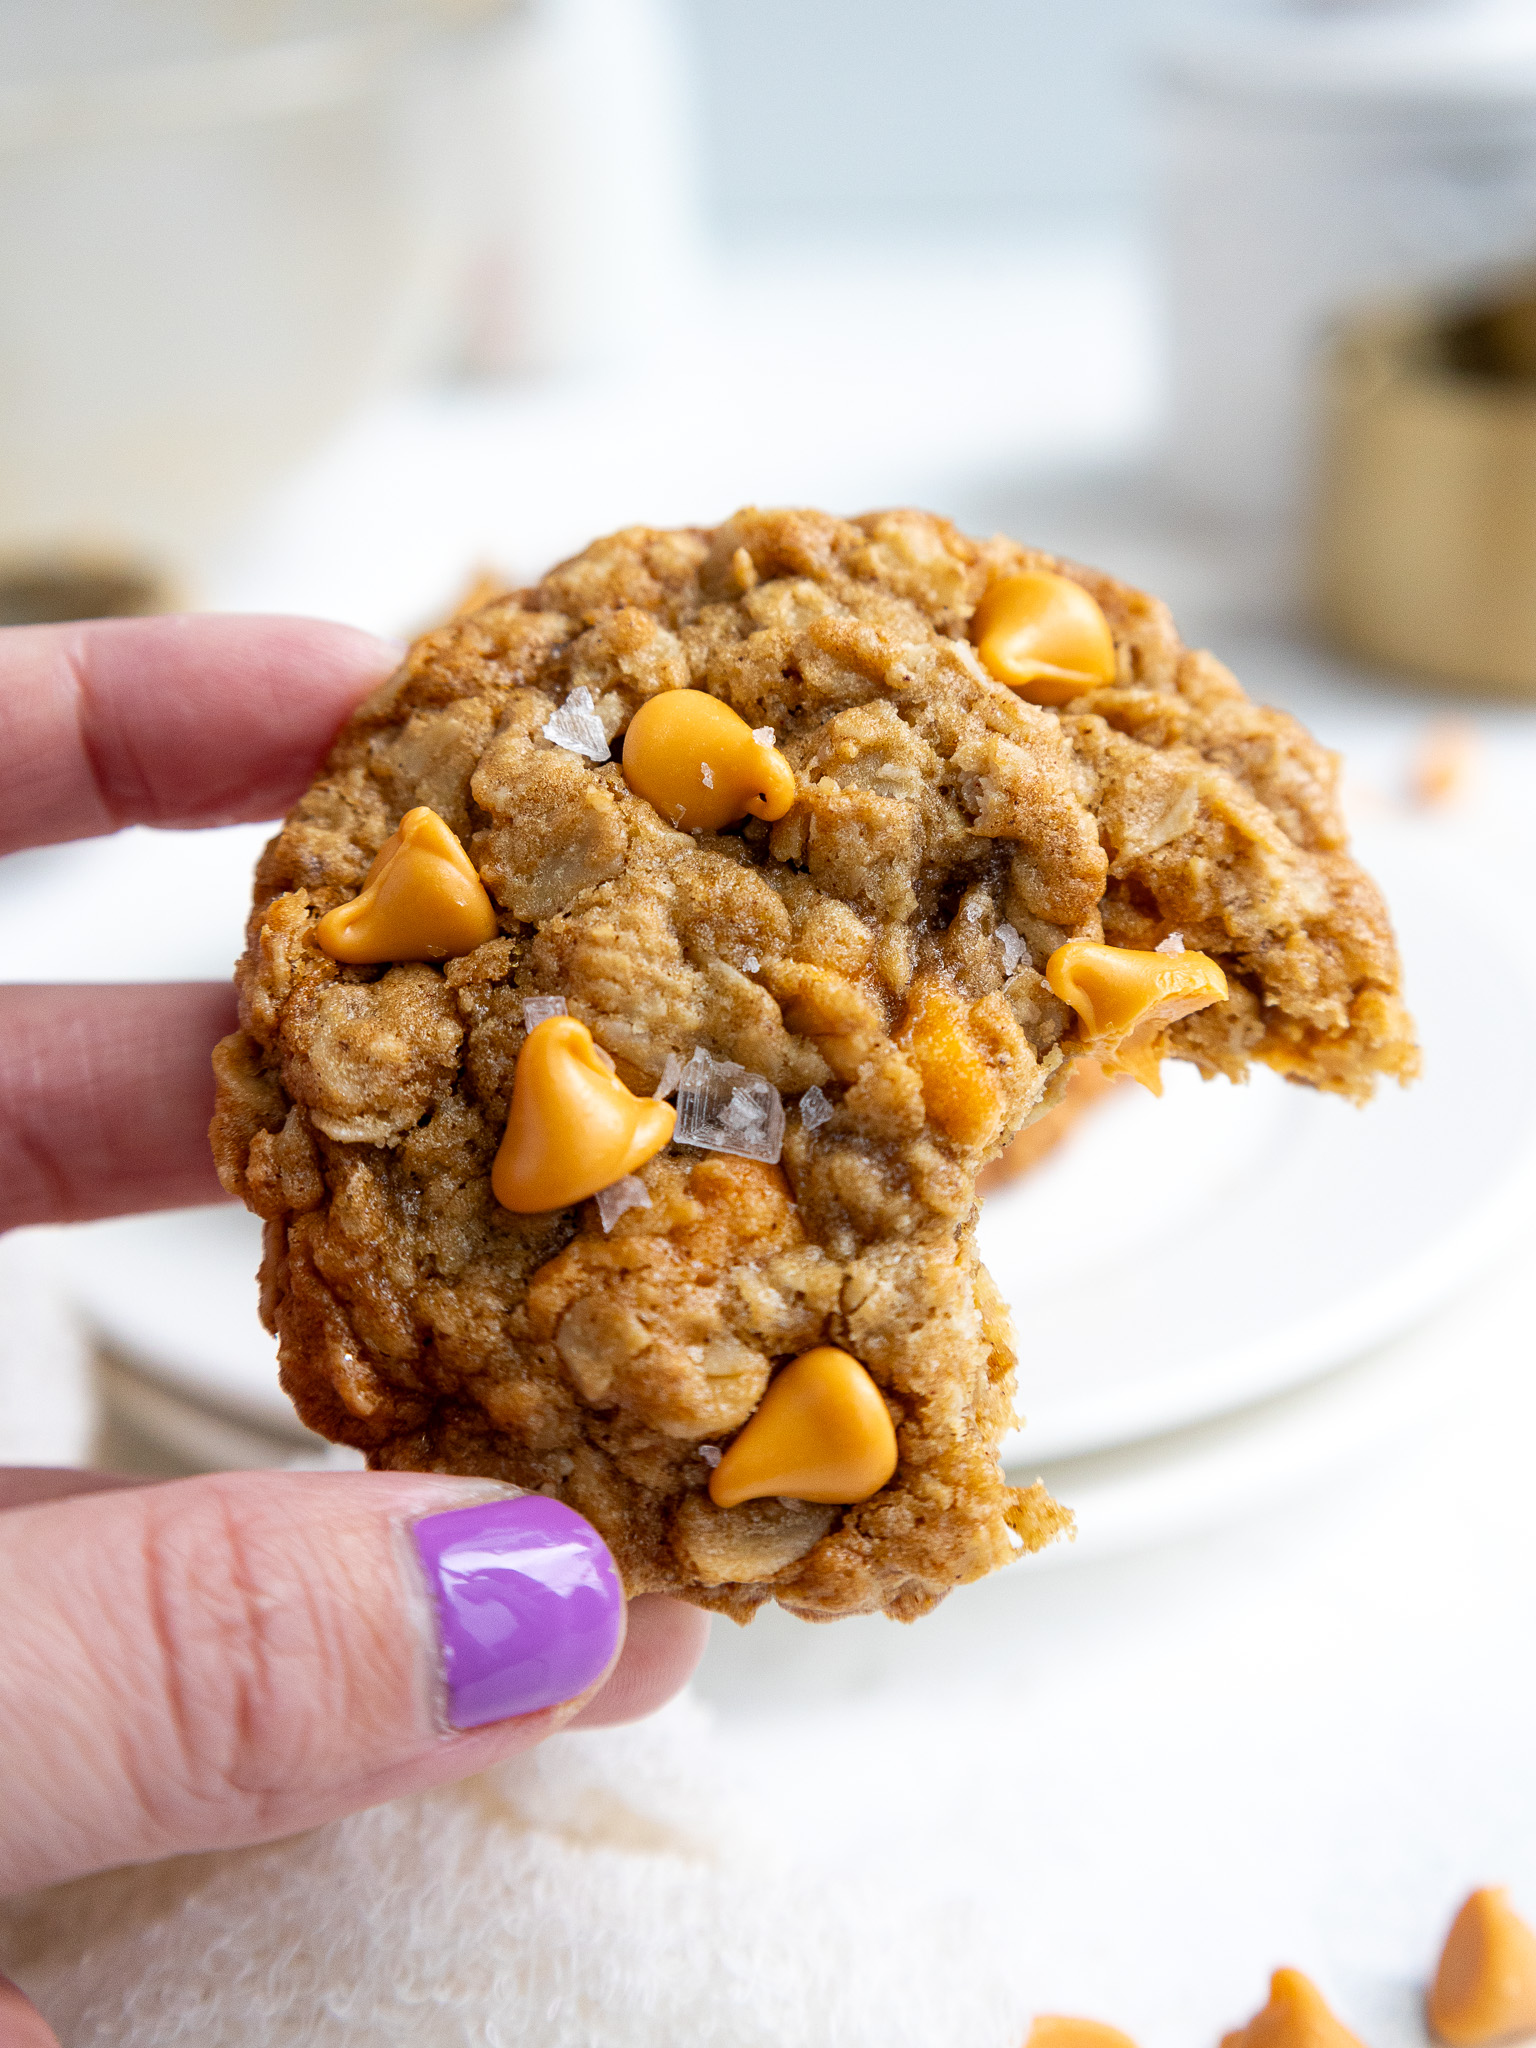 image of an oatmeal scotchie cookie that has been bitten into to show how chewy and soft it is